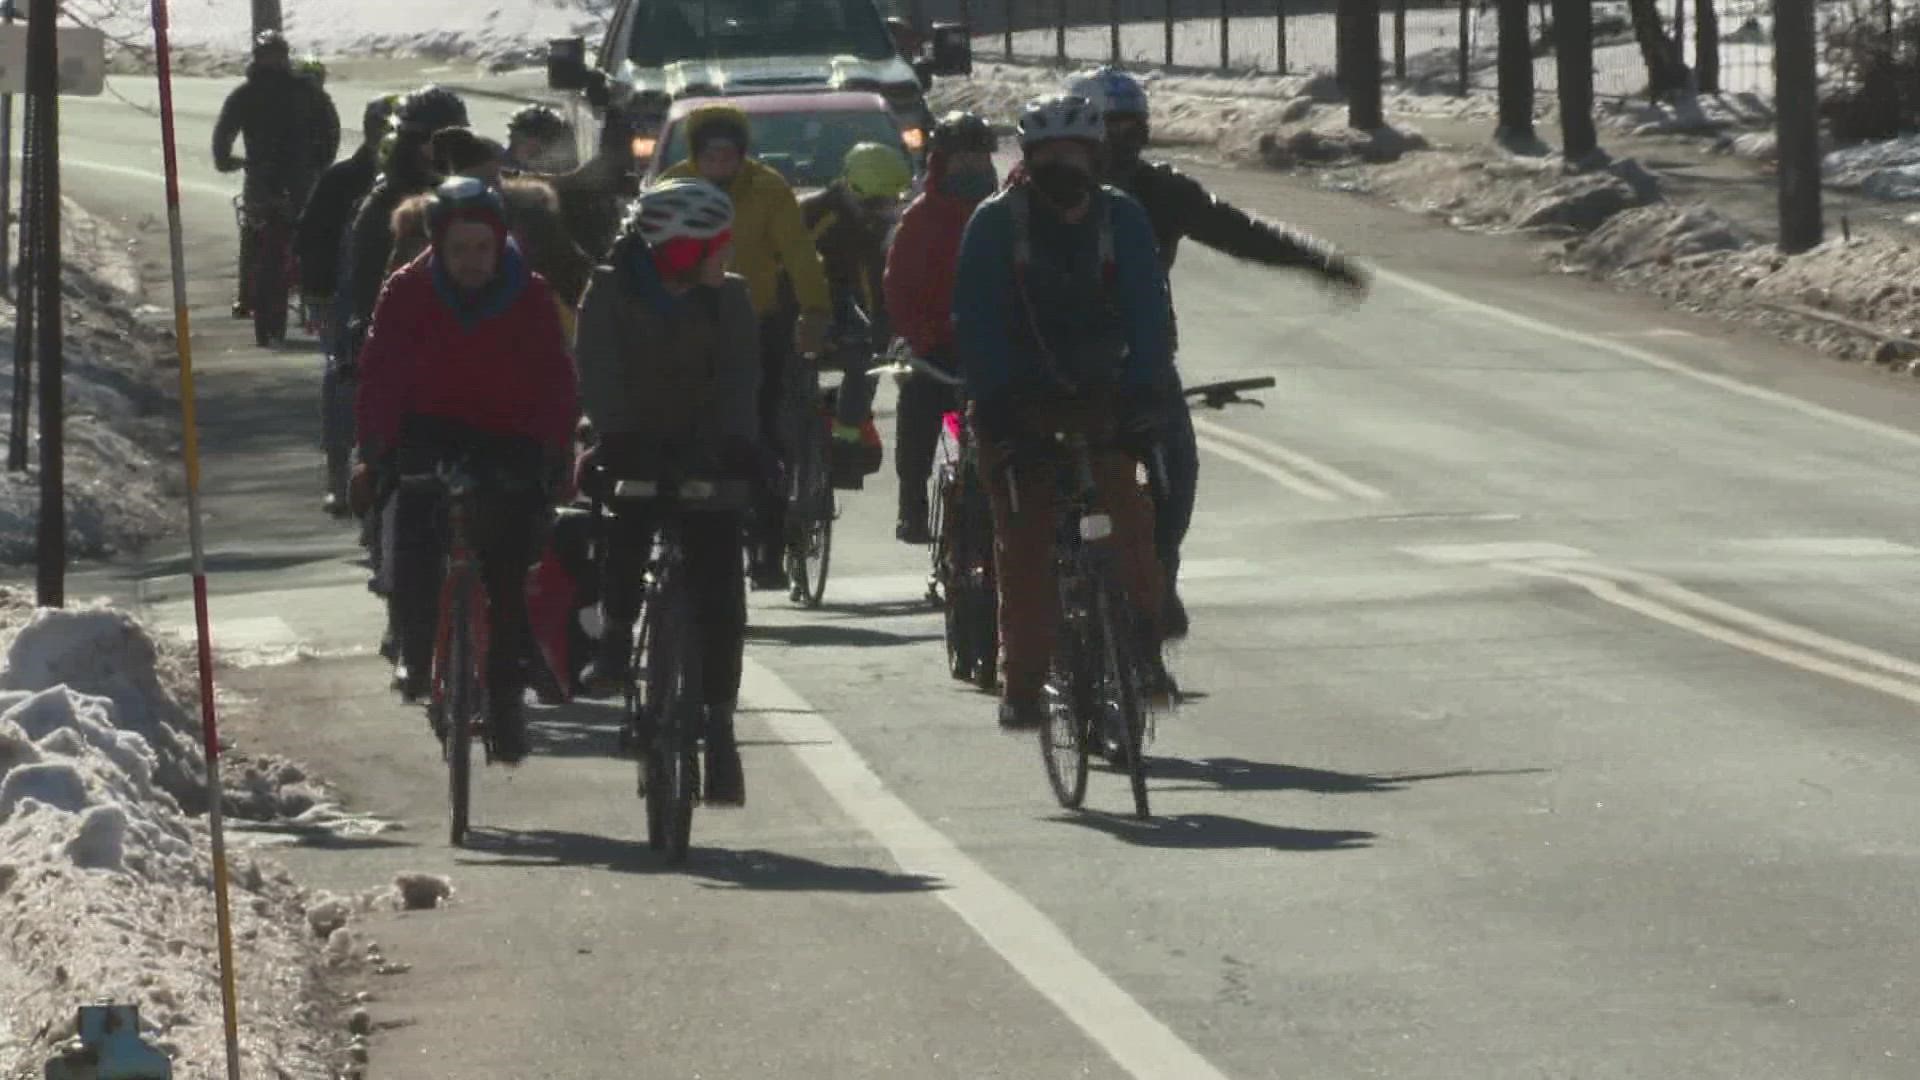 More than a dozen cyclists took part in an audit of the city's bike lanes on Sunday as part of the Bicycle/Pedestrian Advisory Committee.